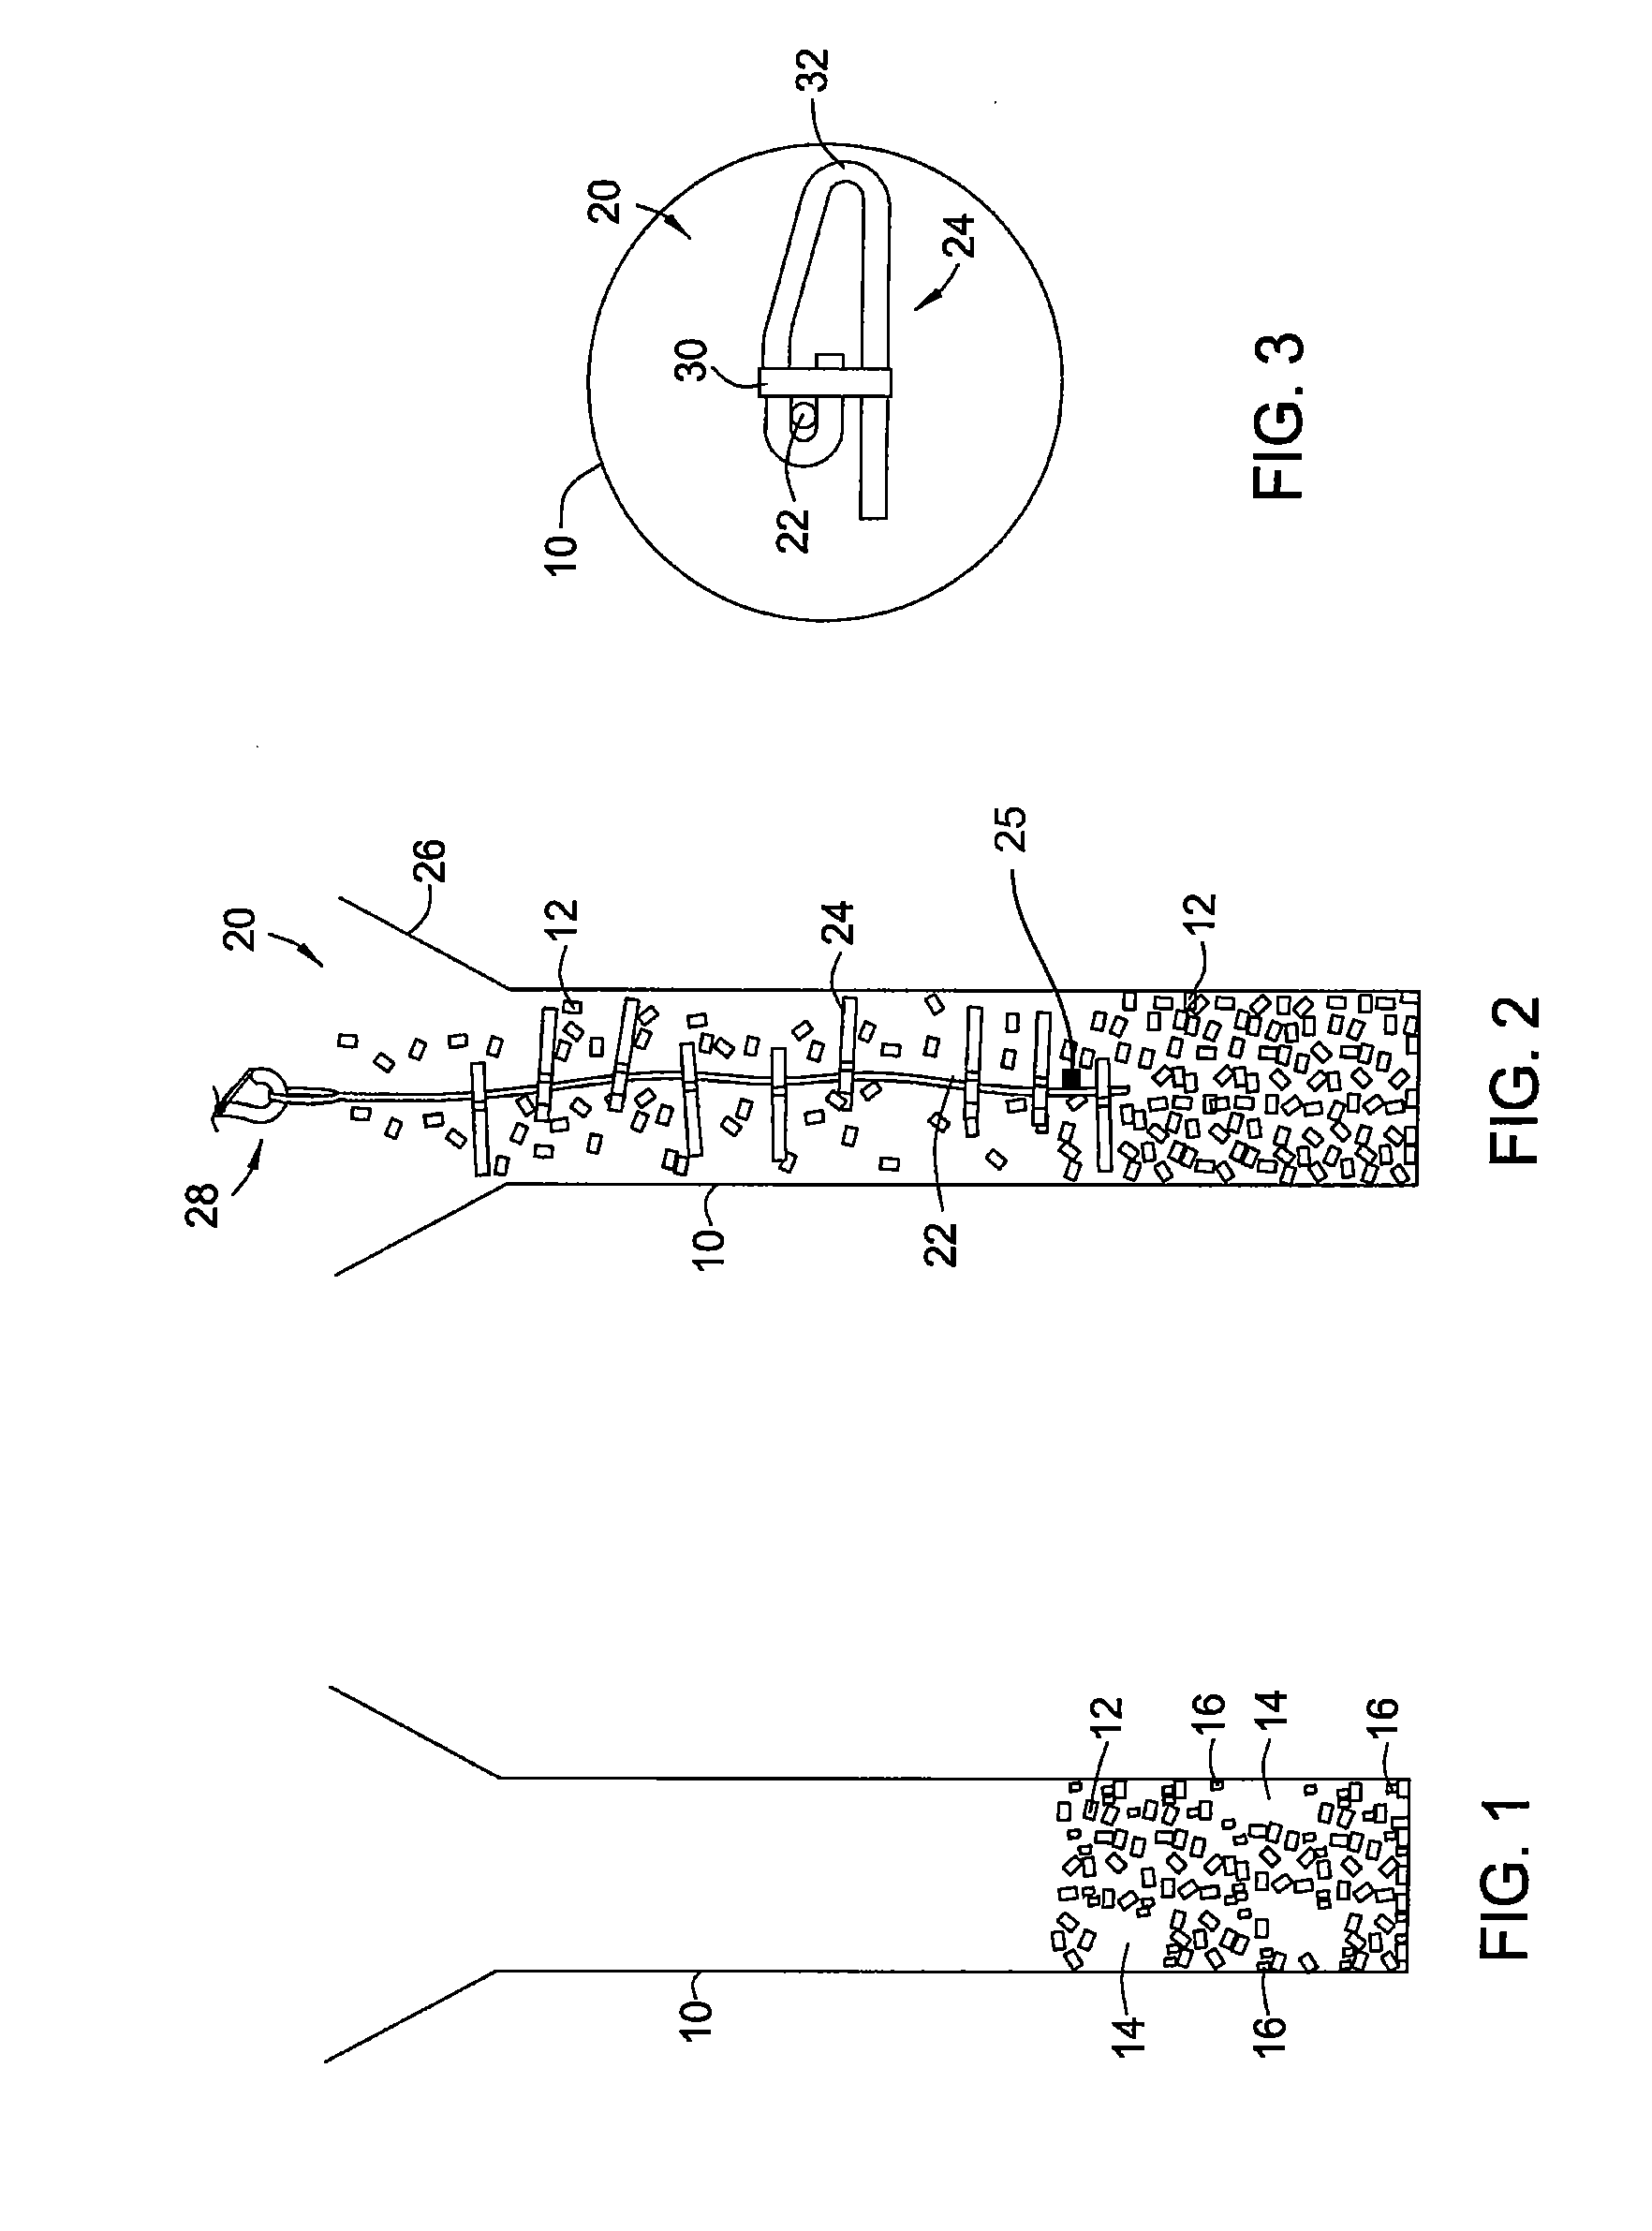 Method and apparatus for loading catalyst